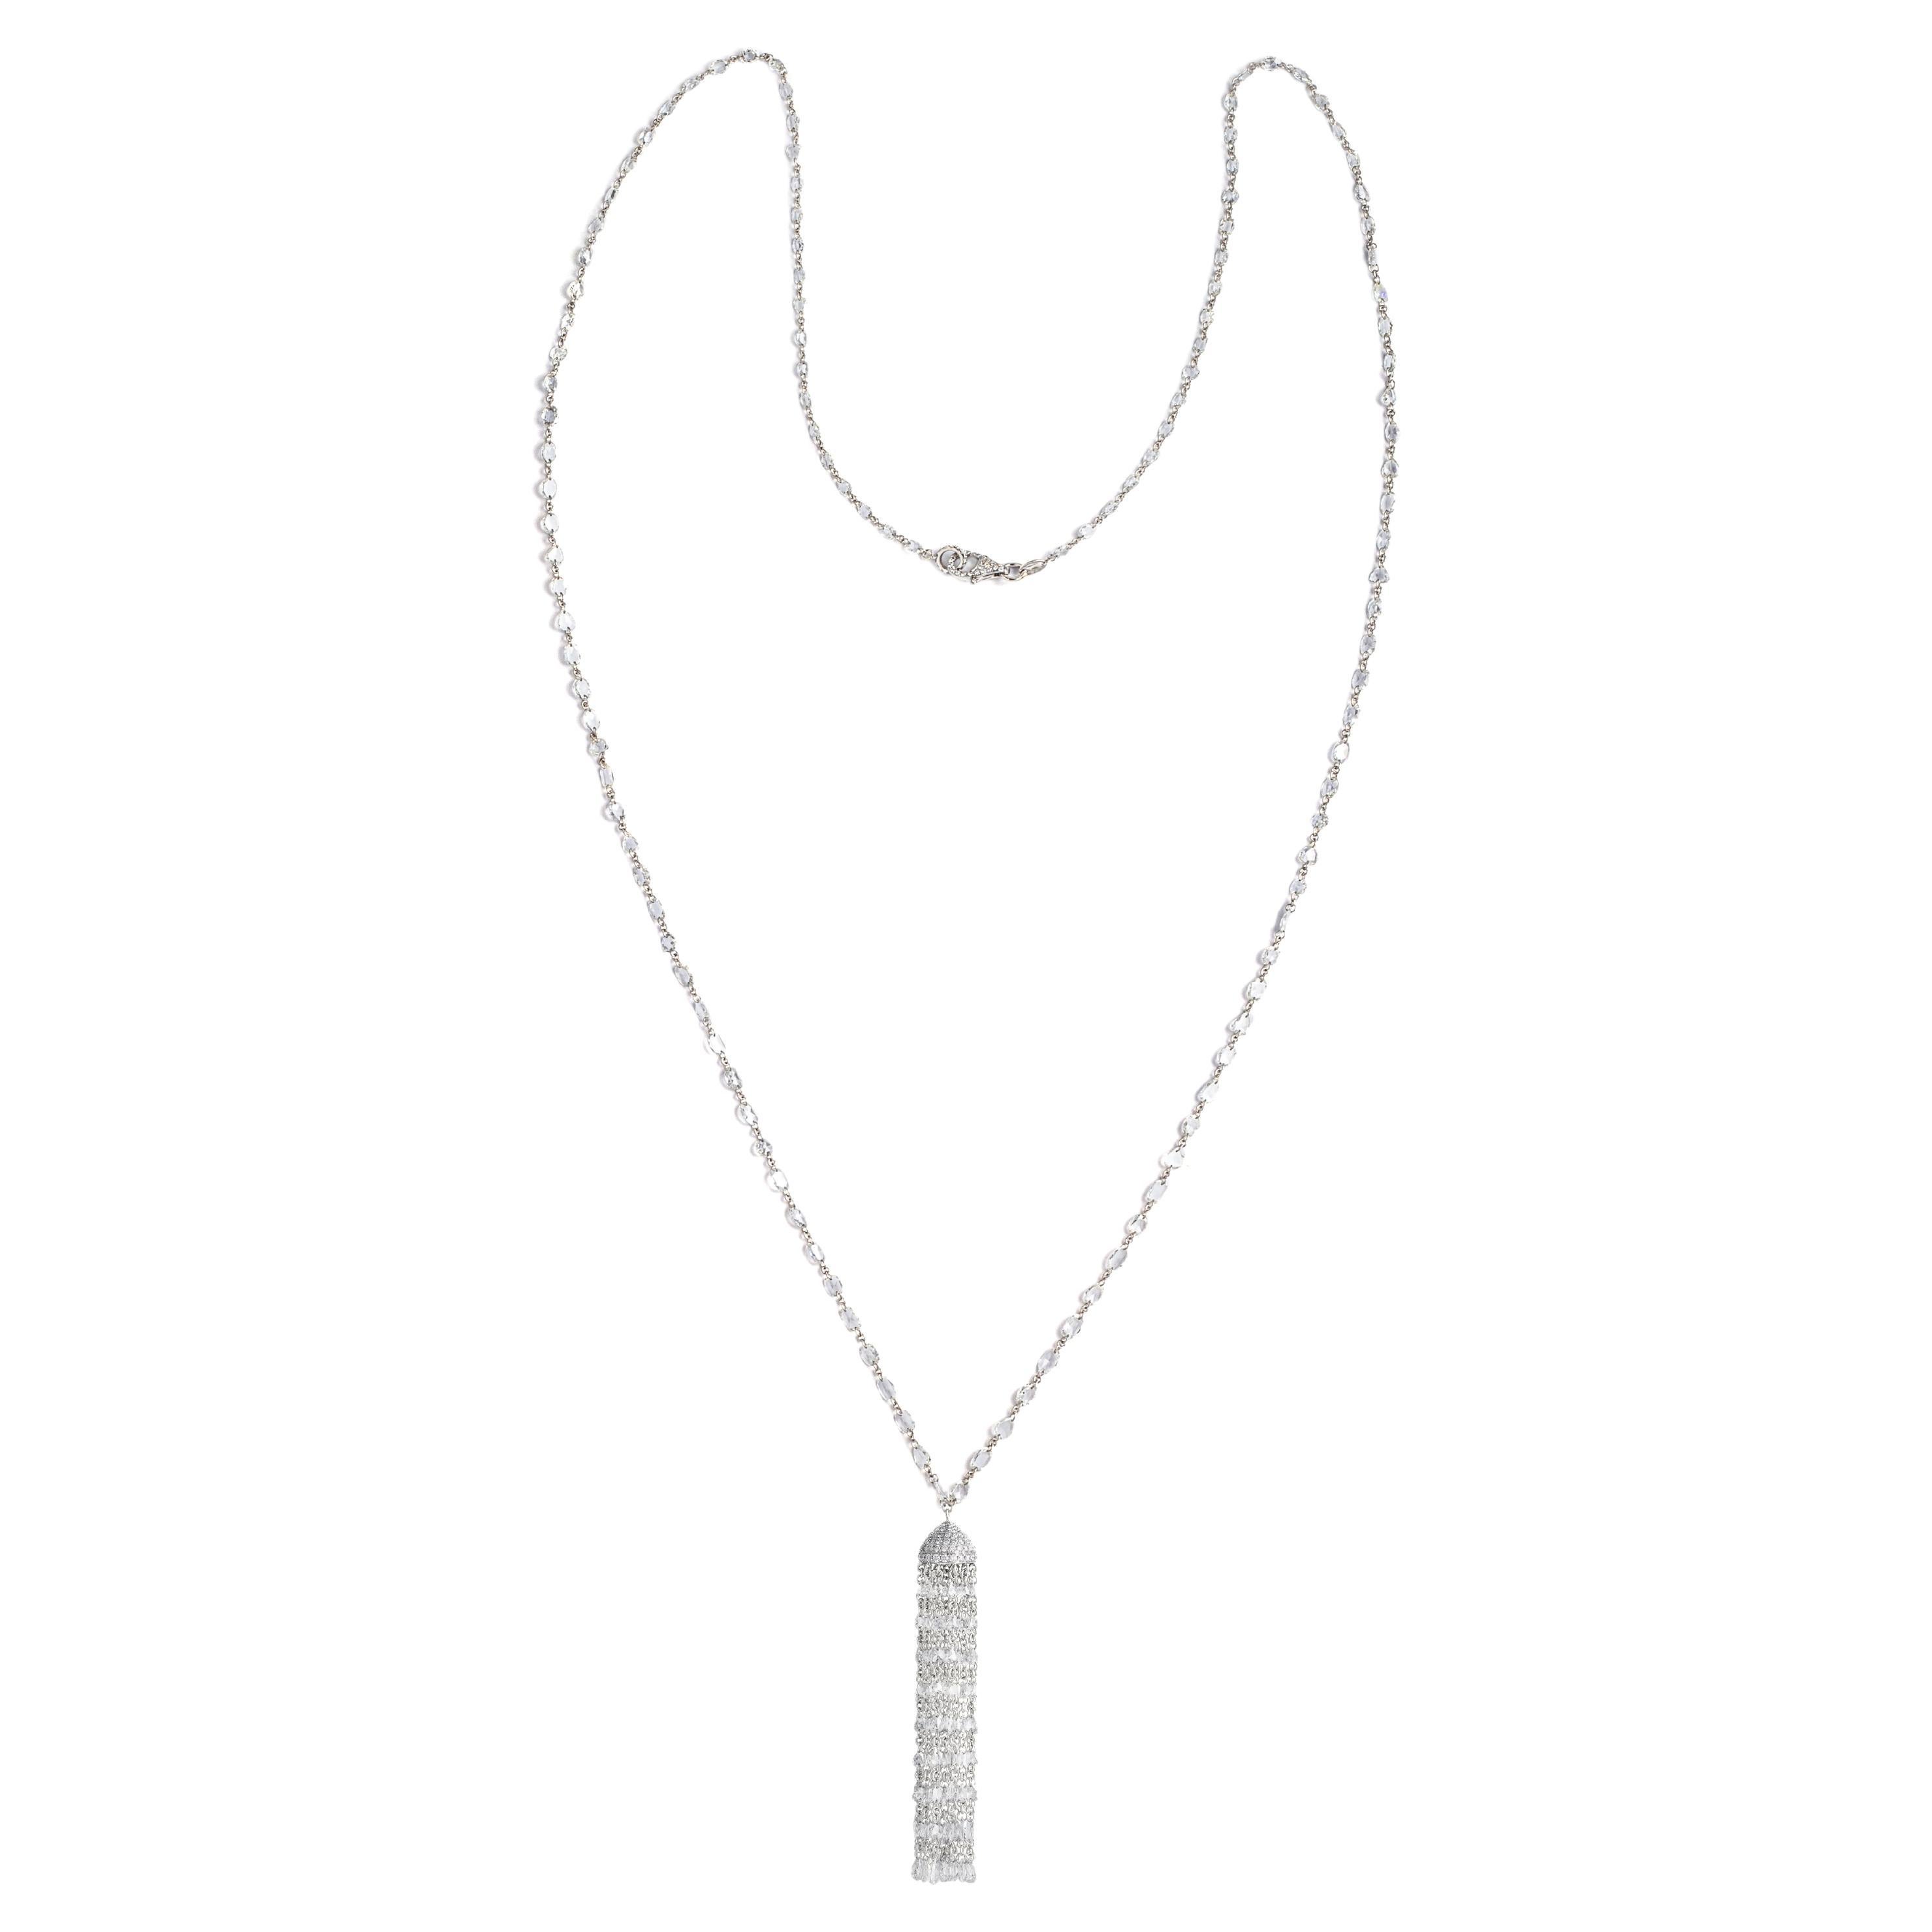 Necklace white gold 18K rose cut and round diamonds 19.51 carat, estimated G/H color and Si1 clarity.
Total gross weight: 10.26 grams.
Pendant length: 5cm
Total lenght: 80.00 centimeters

